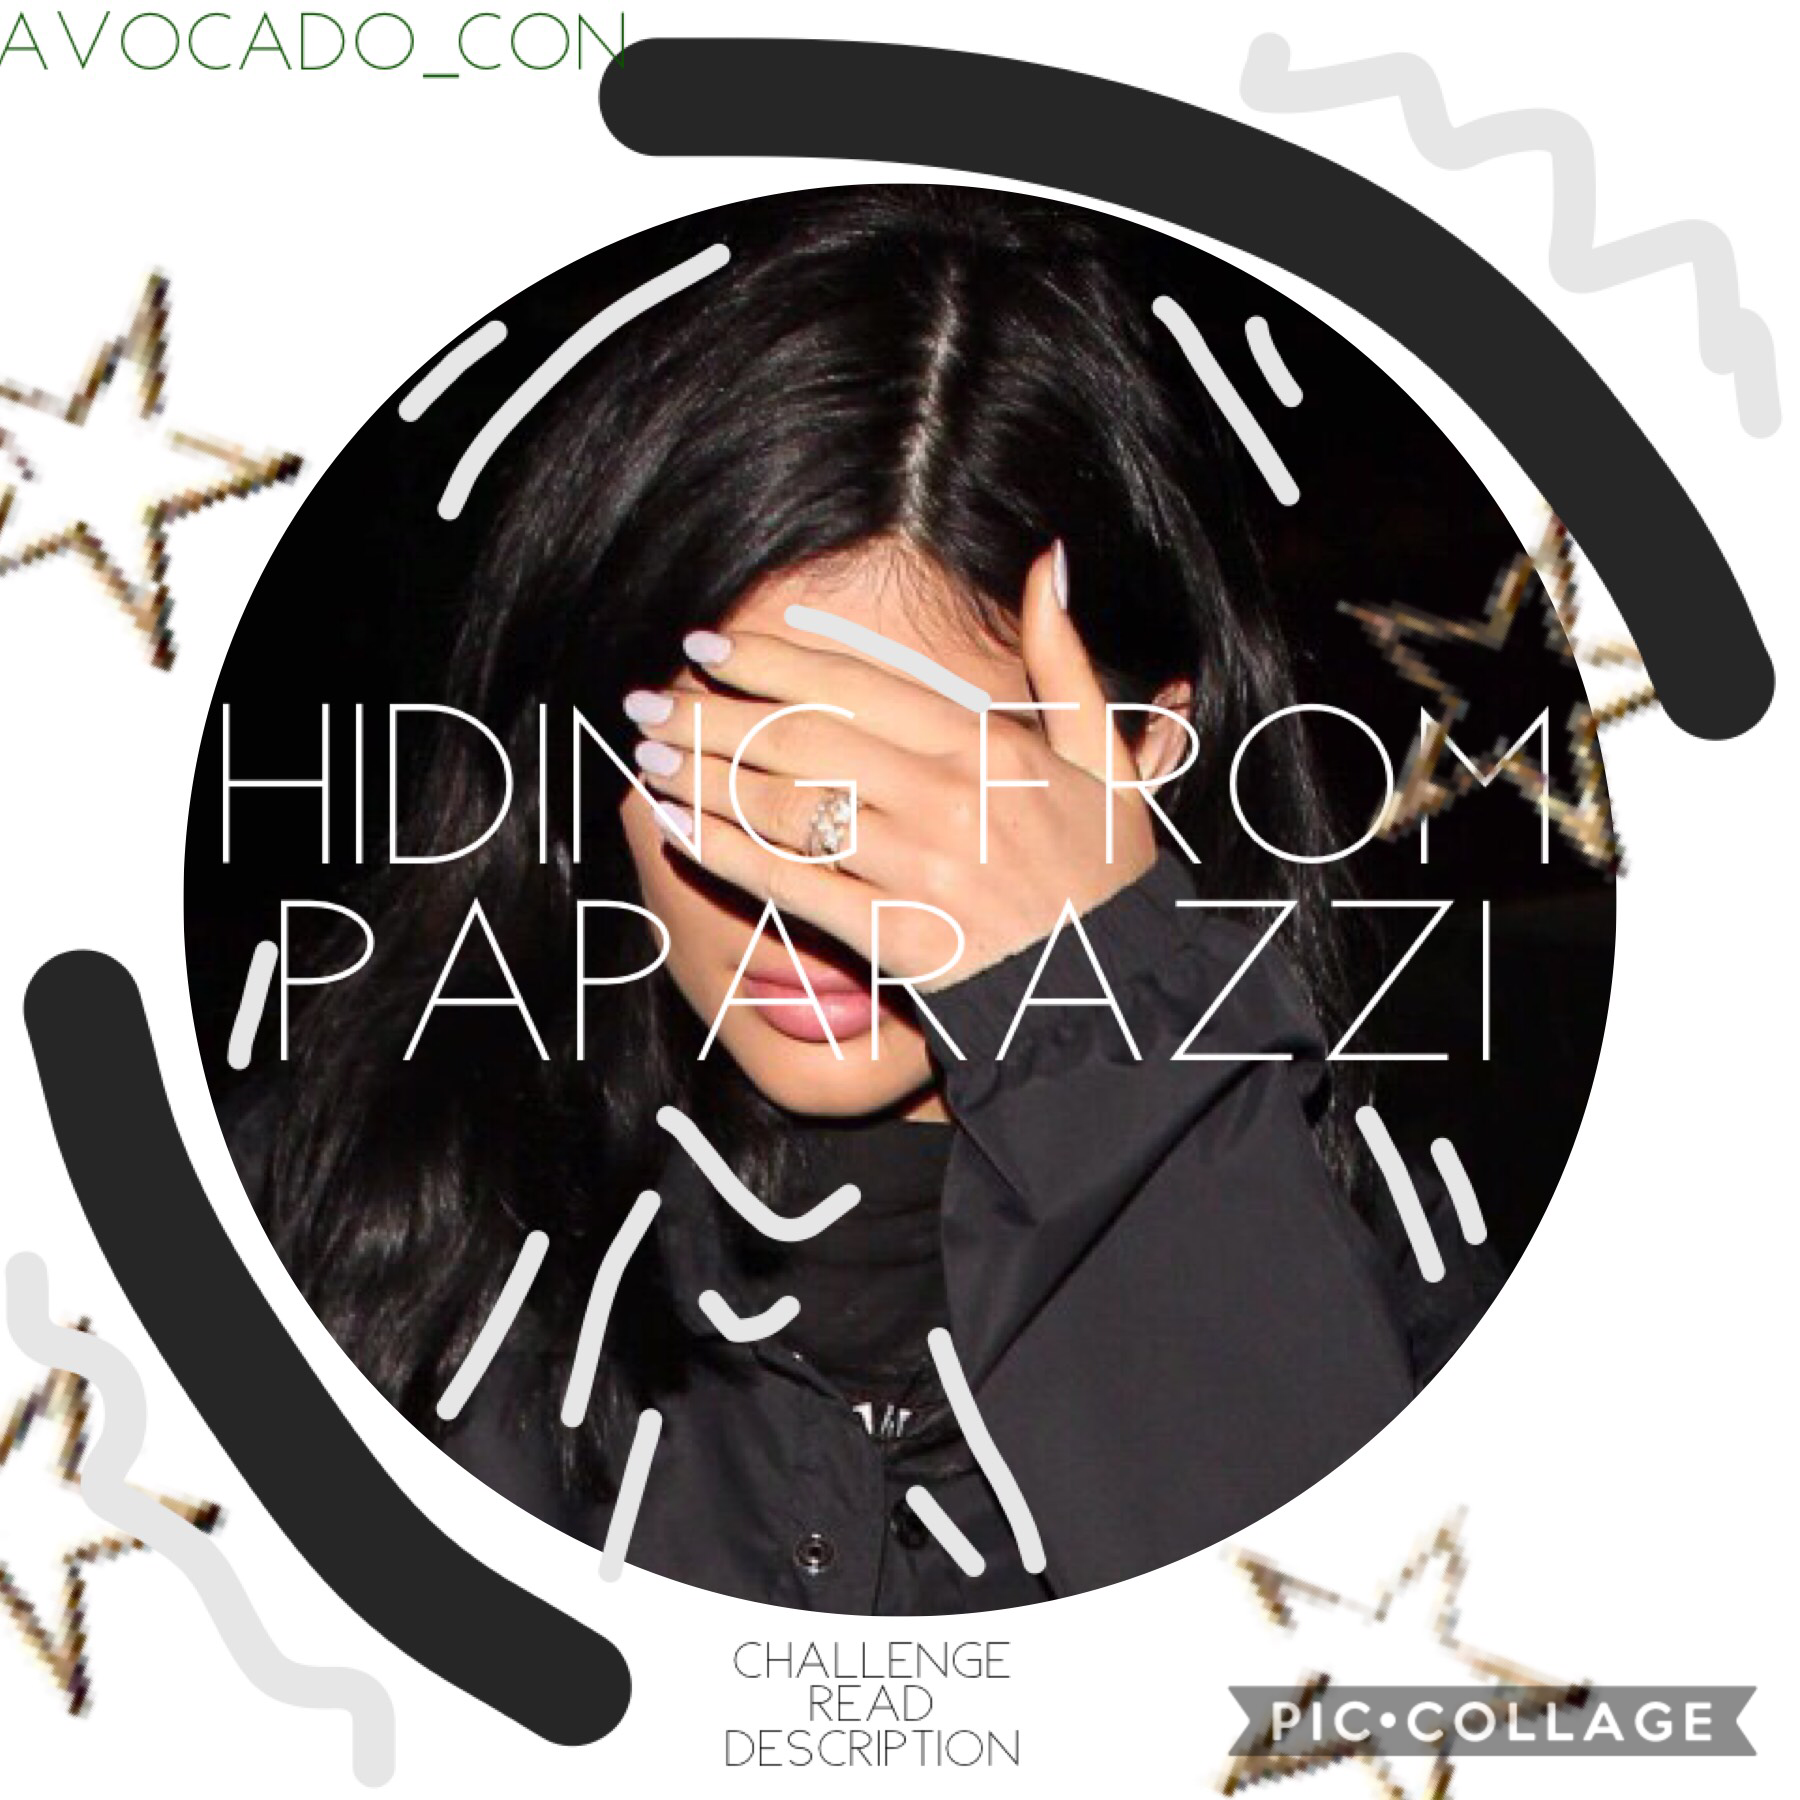 Tap😱

IS THAT KYLIE HIDING??? WELL YA U GUESSED IT ALREADY HERE WITH A CHALLNGE FOR YOU GUYS CALLED ...... HIDE FROM THE PAPARAZZI YOU HAVE TO CHOOSE A CELEB DOING A SIMILAR POSE AS KYLIE AND WRITE THE CAPTHION HIDING FROM PAPARAZZI BE SURE TO ADD MY NAME